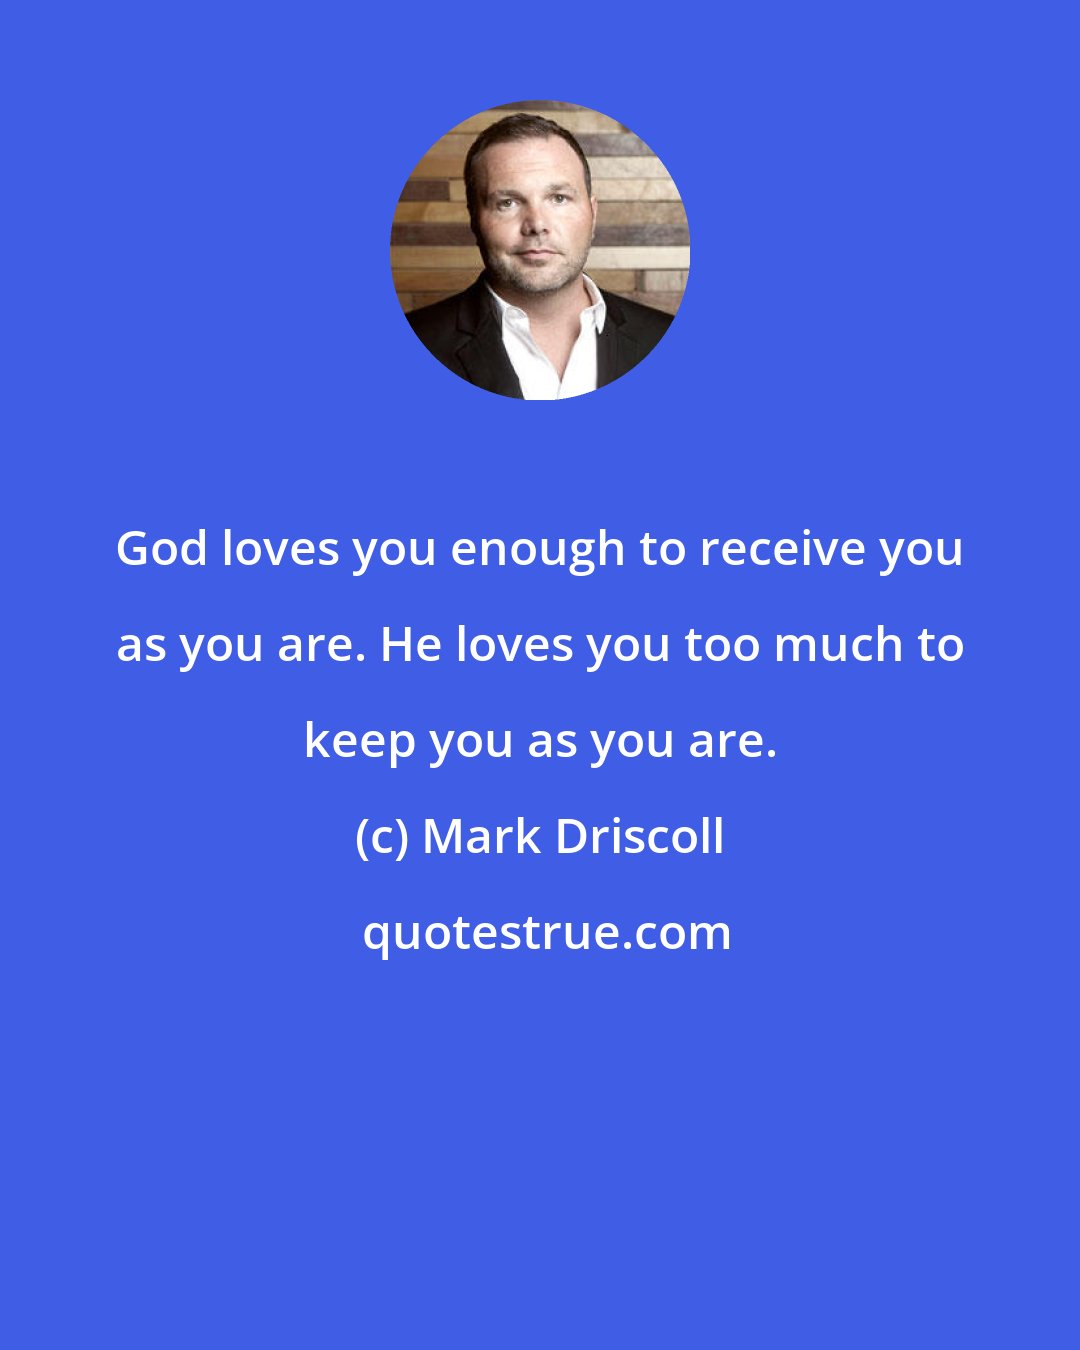 Mark Driscoll: God loves you enough to receive you as you are. He loves you too much to keep you as you are.